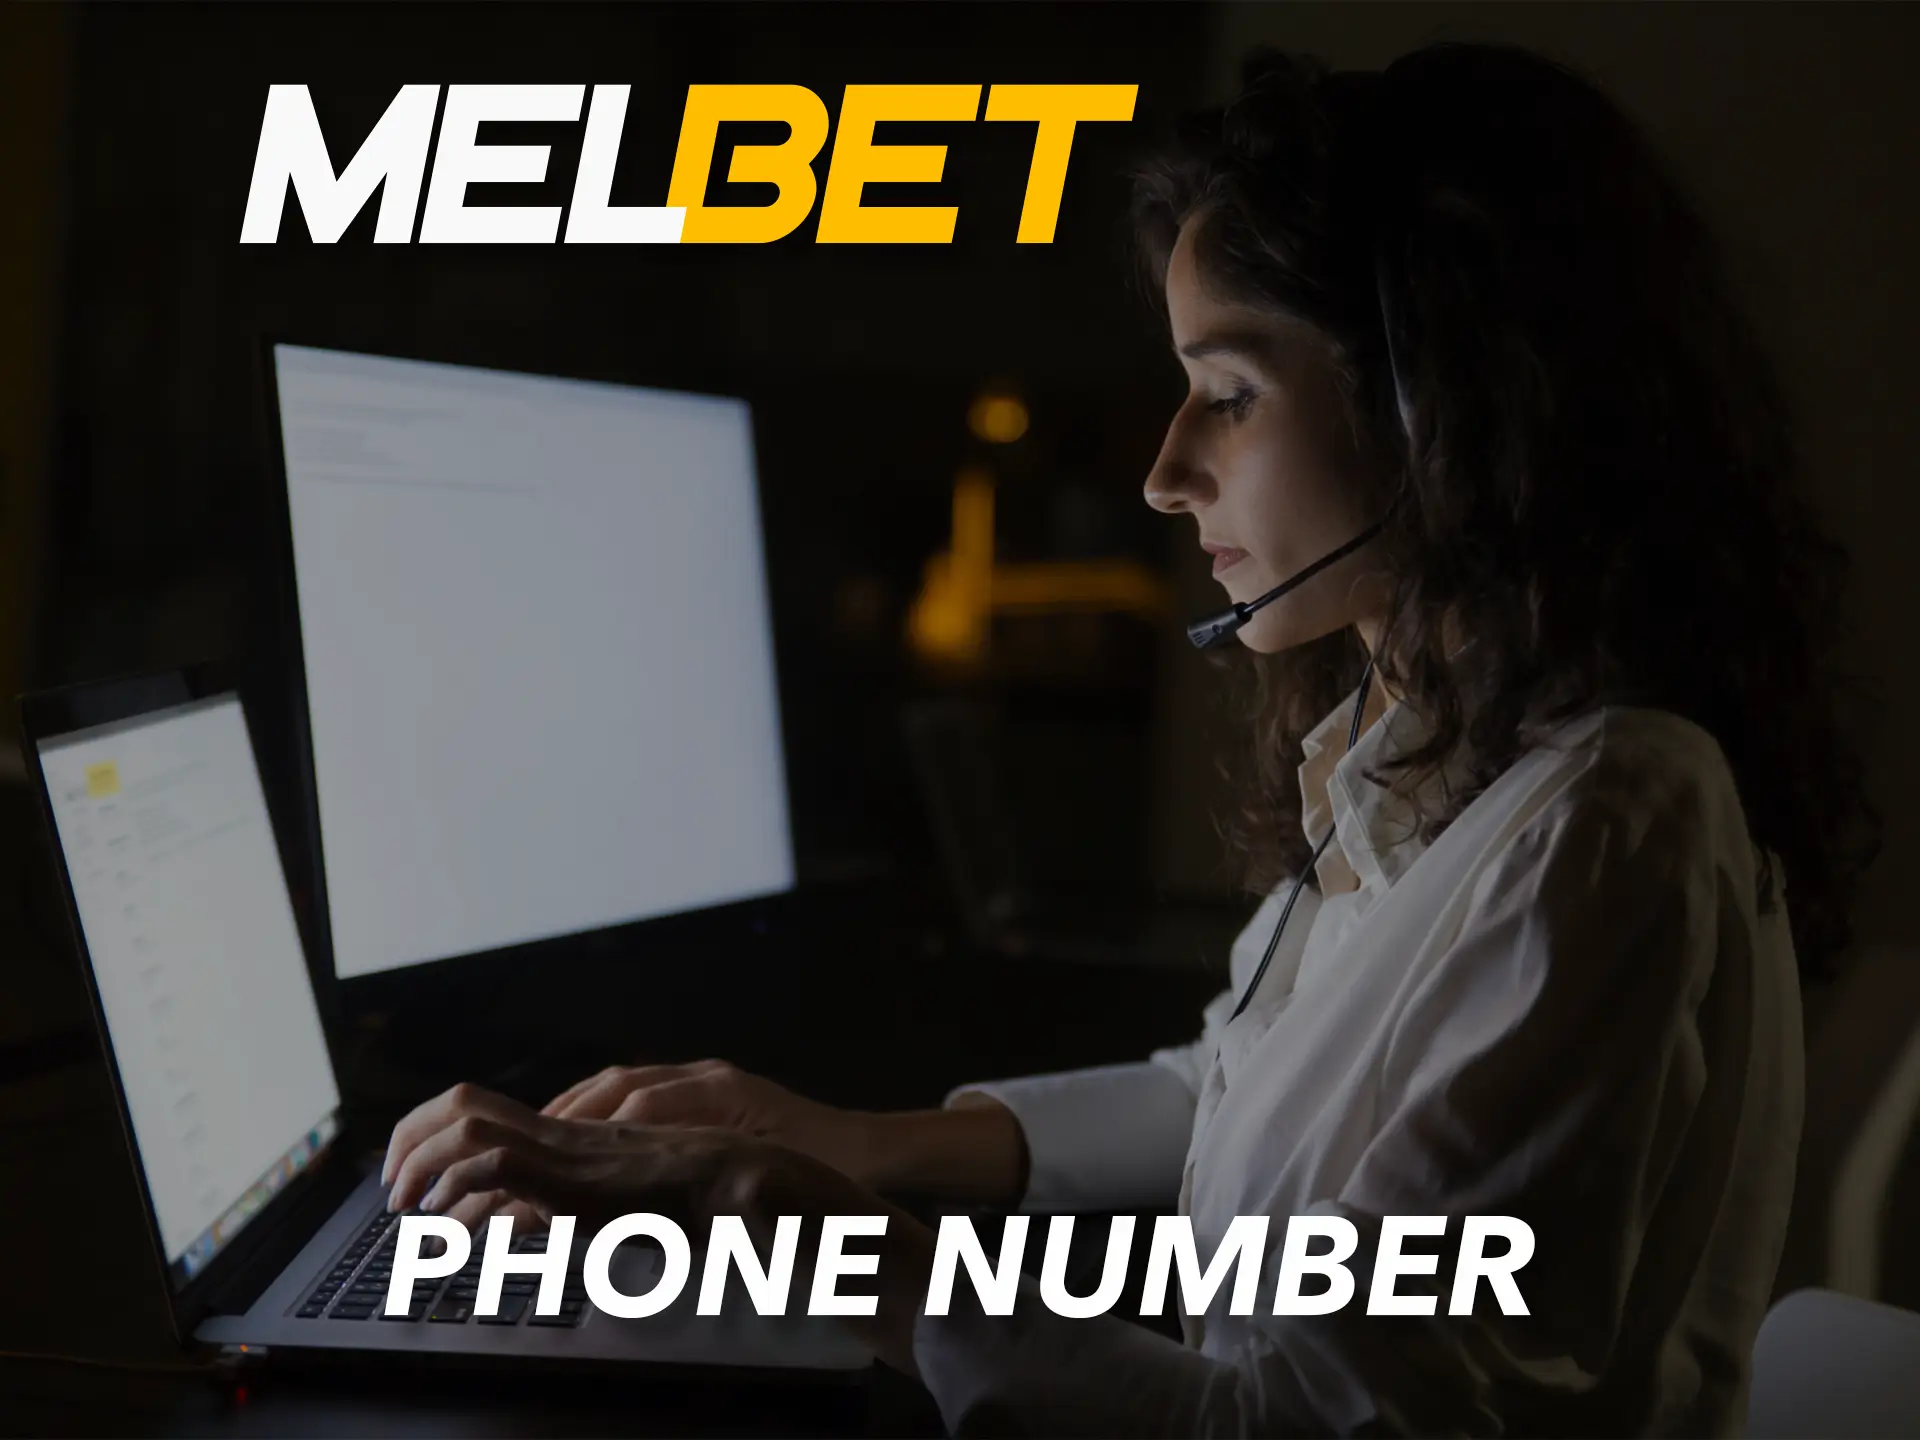 Call and chat with Melbet's live support team.